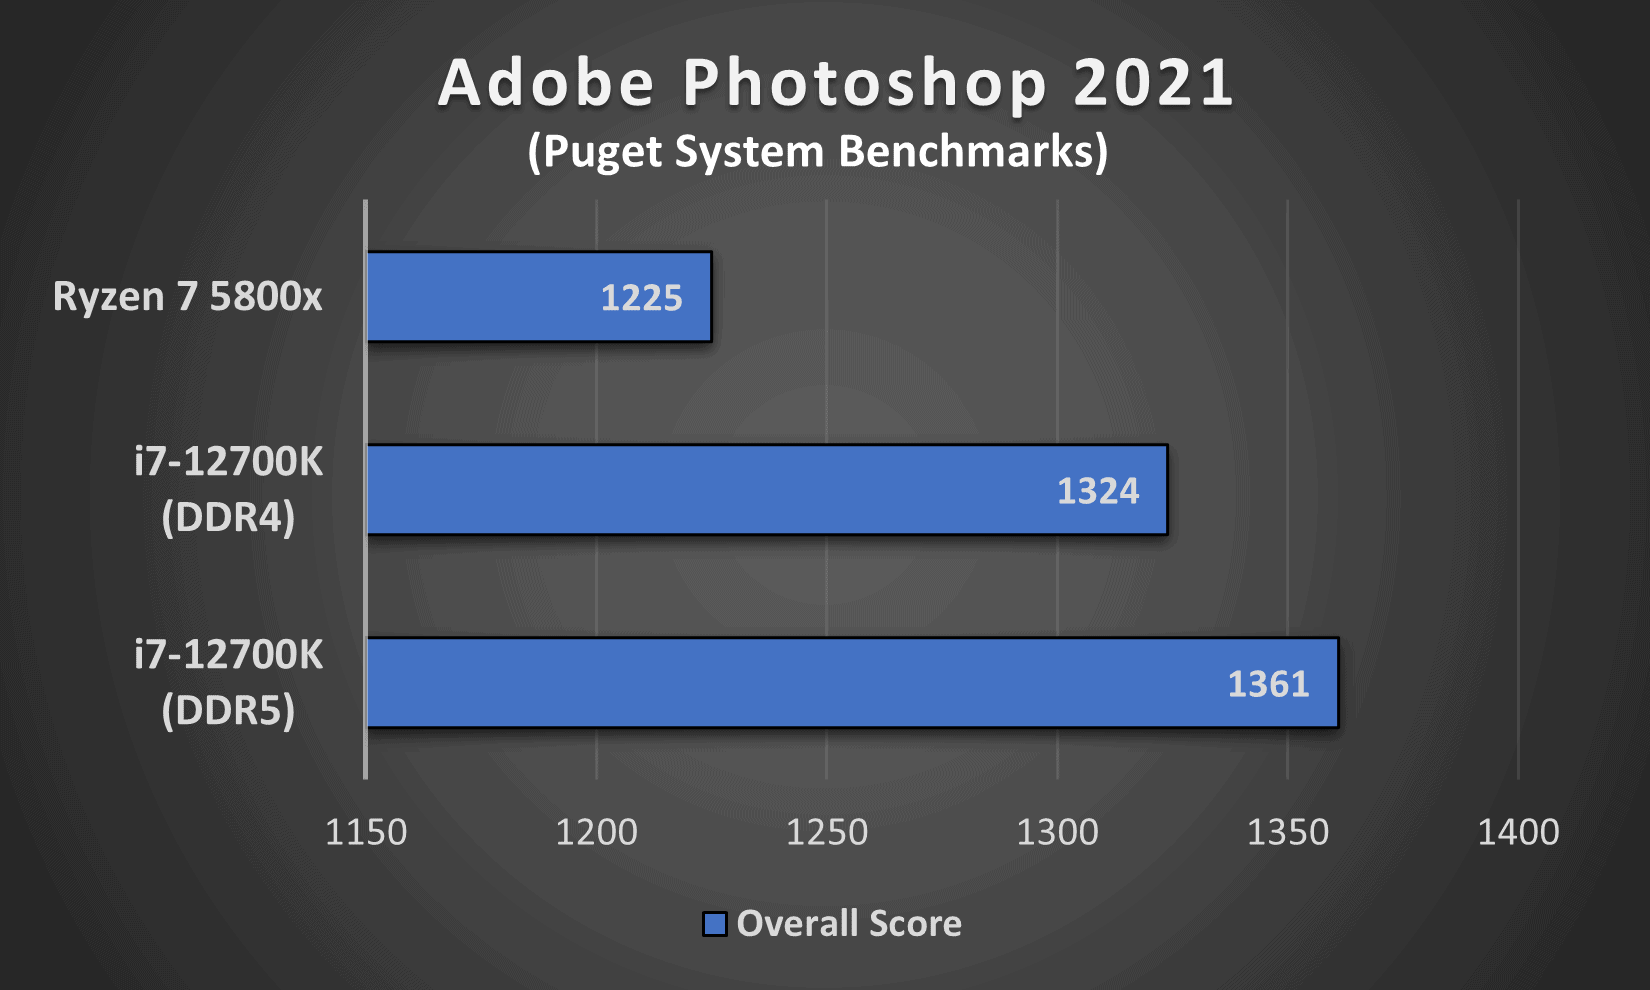 Adobe Photoshop 2021 performance comparison between Intel's i7 12700K (DDR4 and DDR5) and AMD's Ryzen 7 5800x